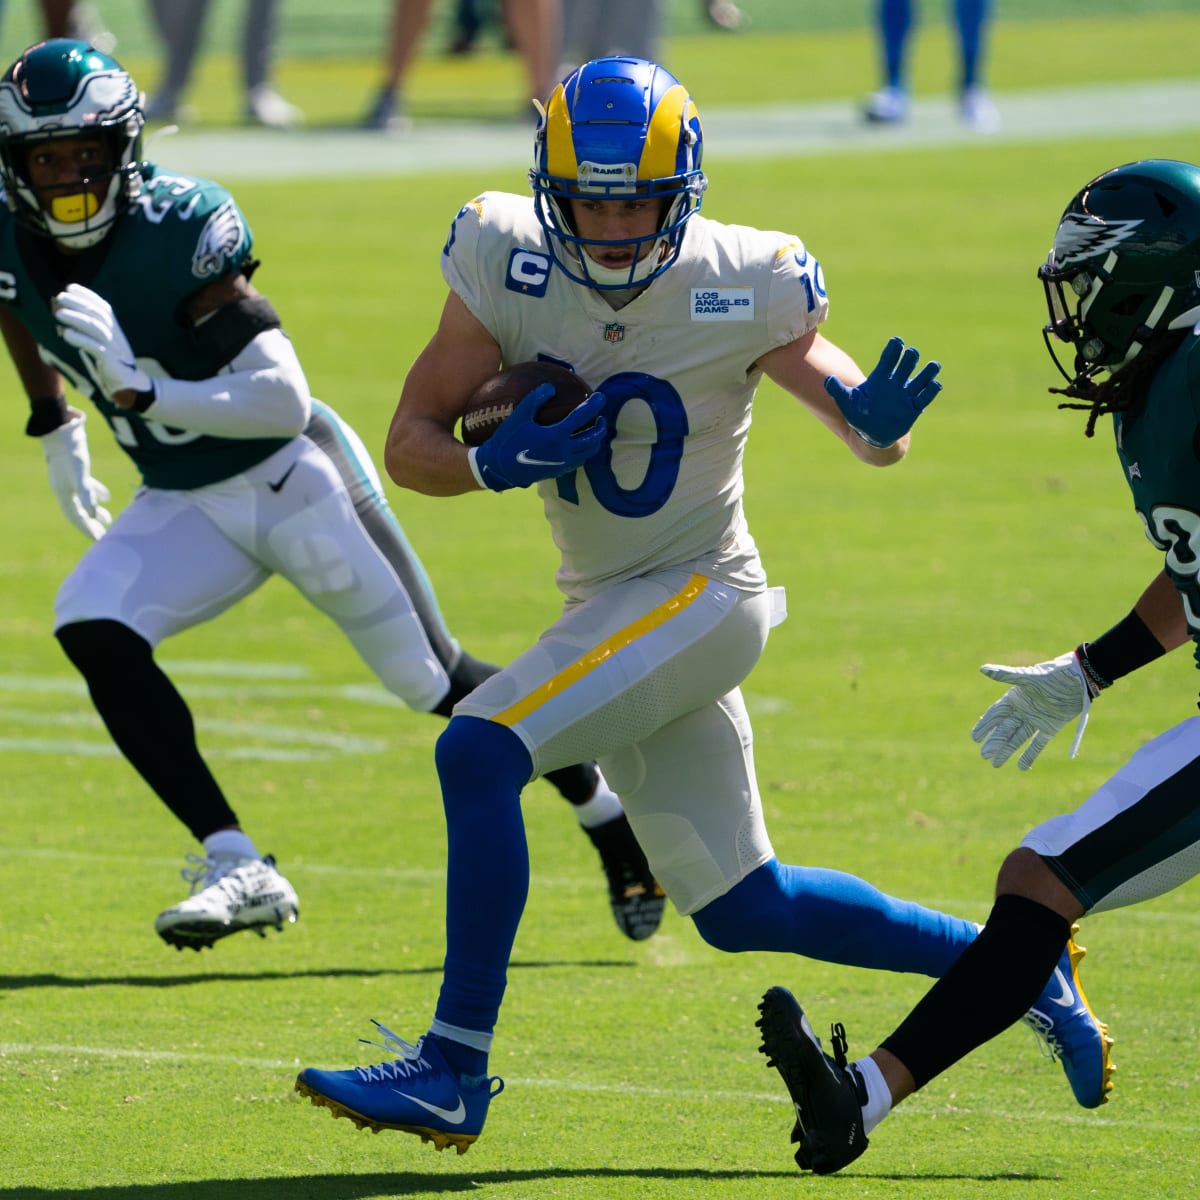 EAGLES vs RAMS PREVIEW I Top Matchups to Watch, Analysis & More